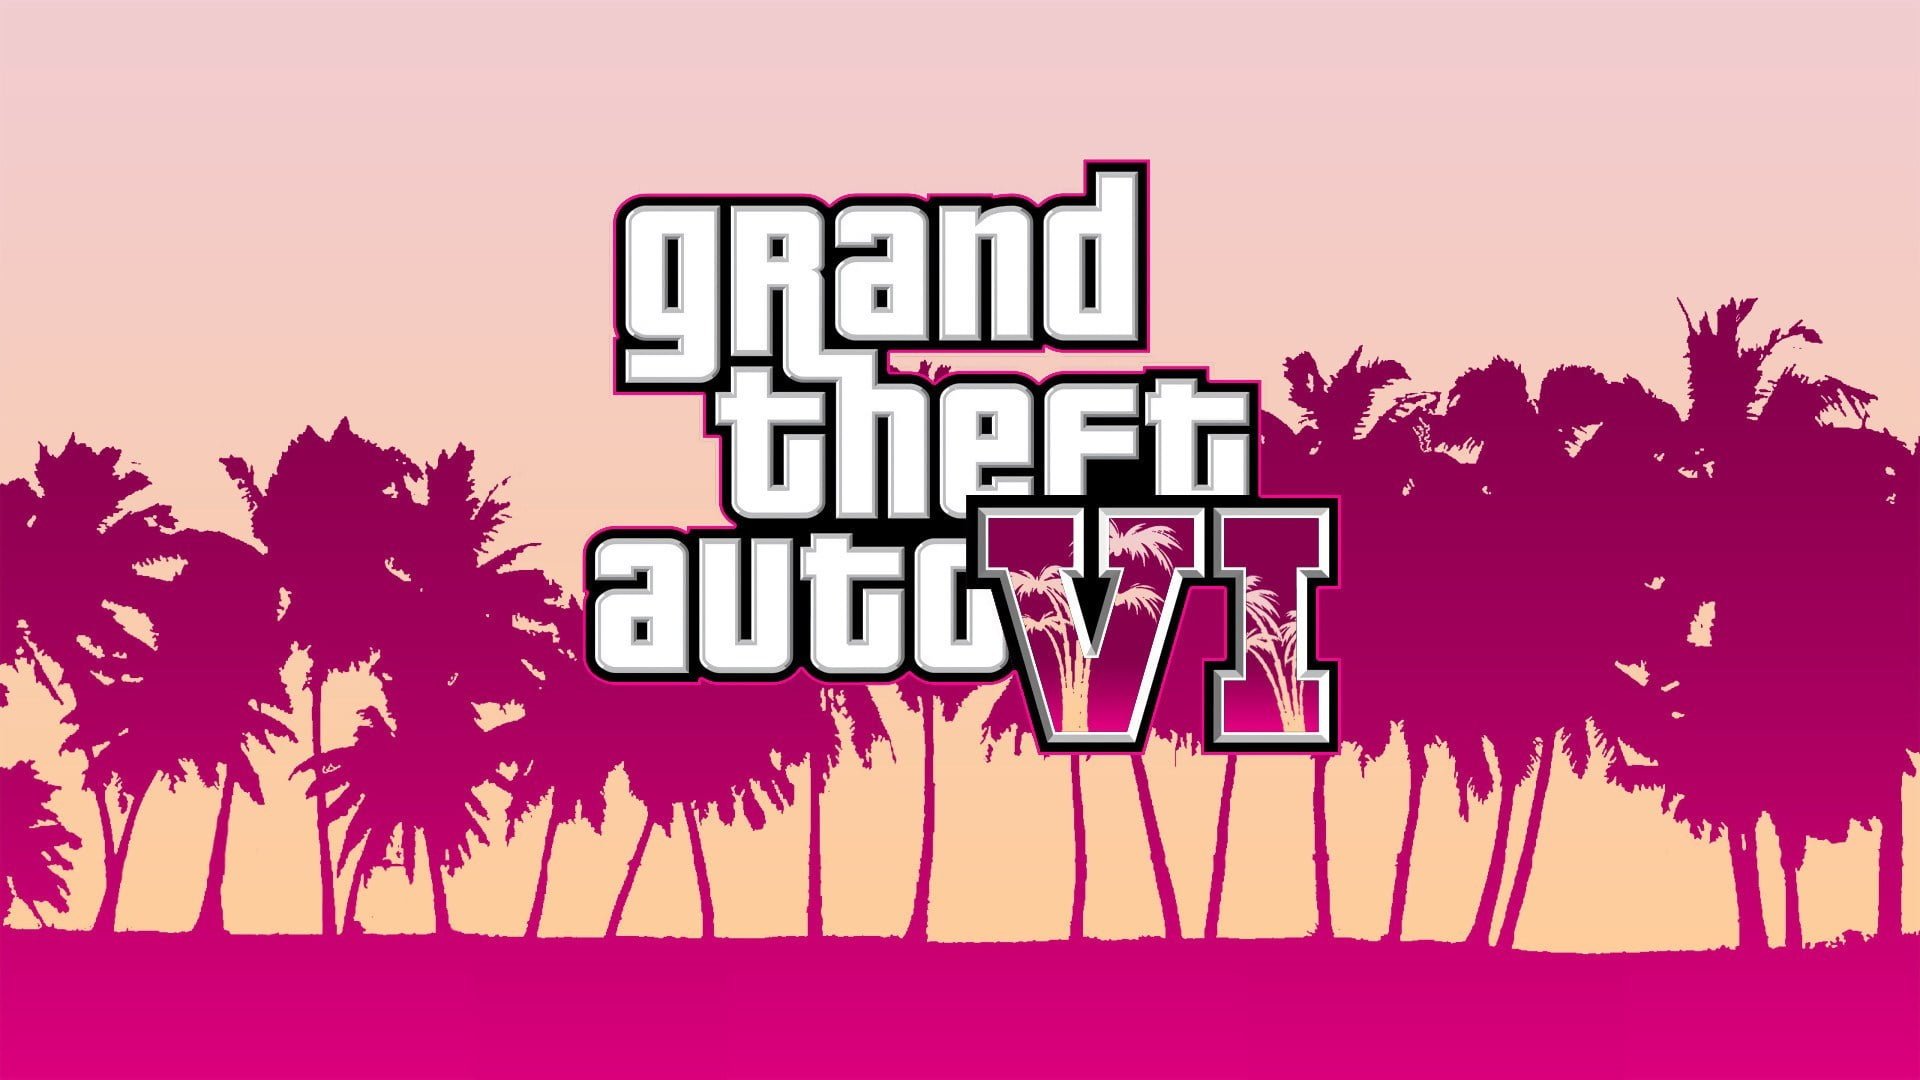 Grand Theft Auto 6 Full Game Download Free on Mobile